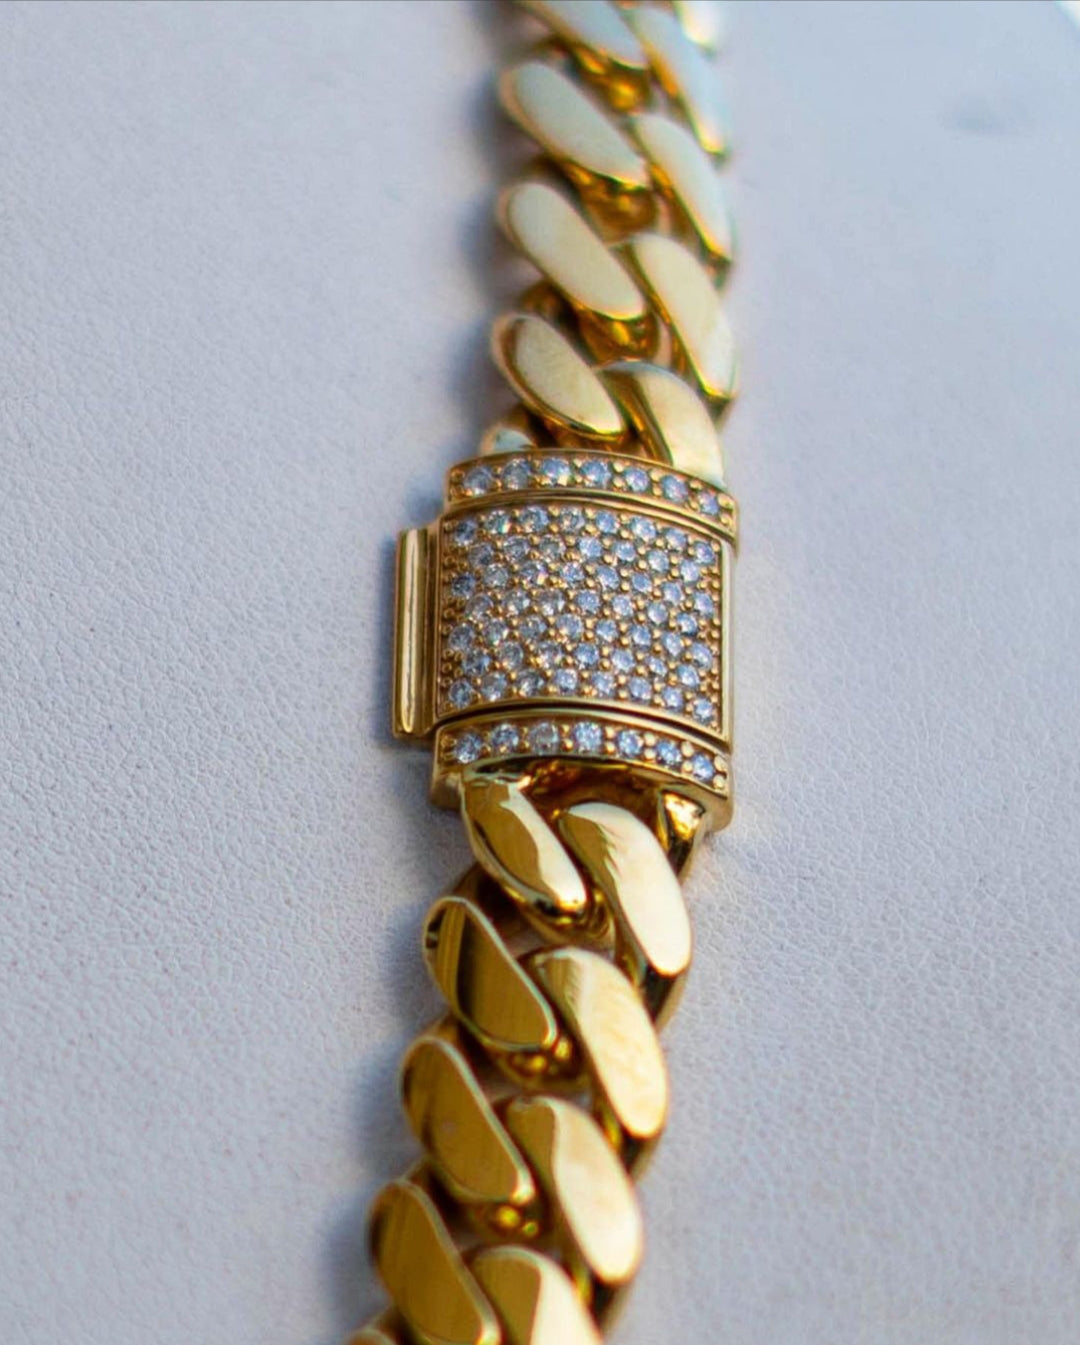 RARE PRINCE by CARAT SUTRA | Solid 14mm Miami Cuban Link Chain with Iced Lock | 22kt Gold Micron Plated on 925 Sterling Silver Chain with AAA+ Quality Swarovski Diamonds | Men's Jewelry | With Certificate of Authenticity and 925 Hallmark - caratsutra